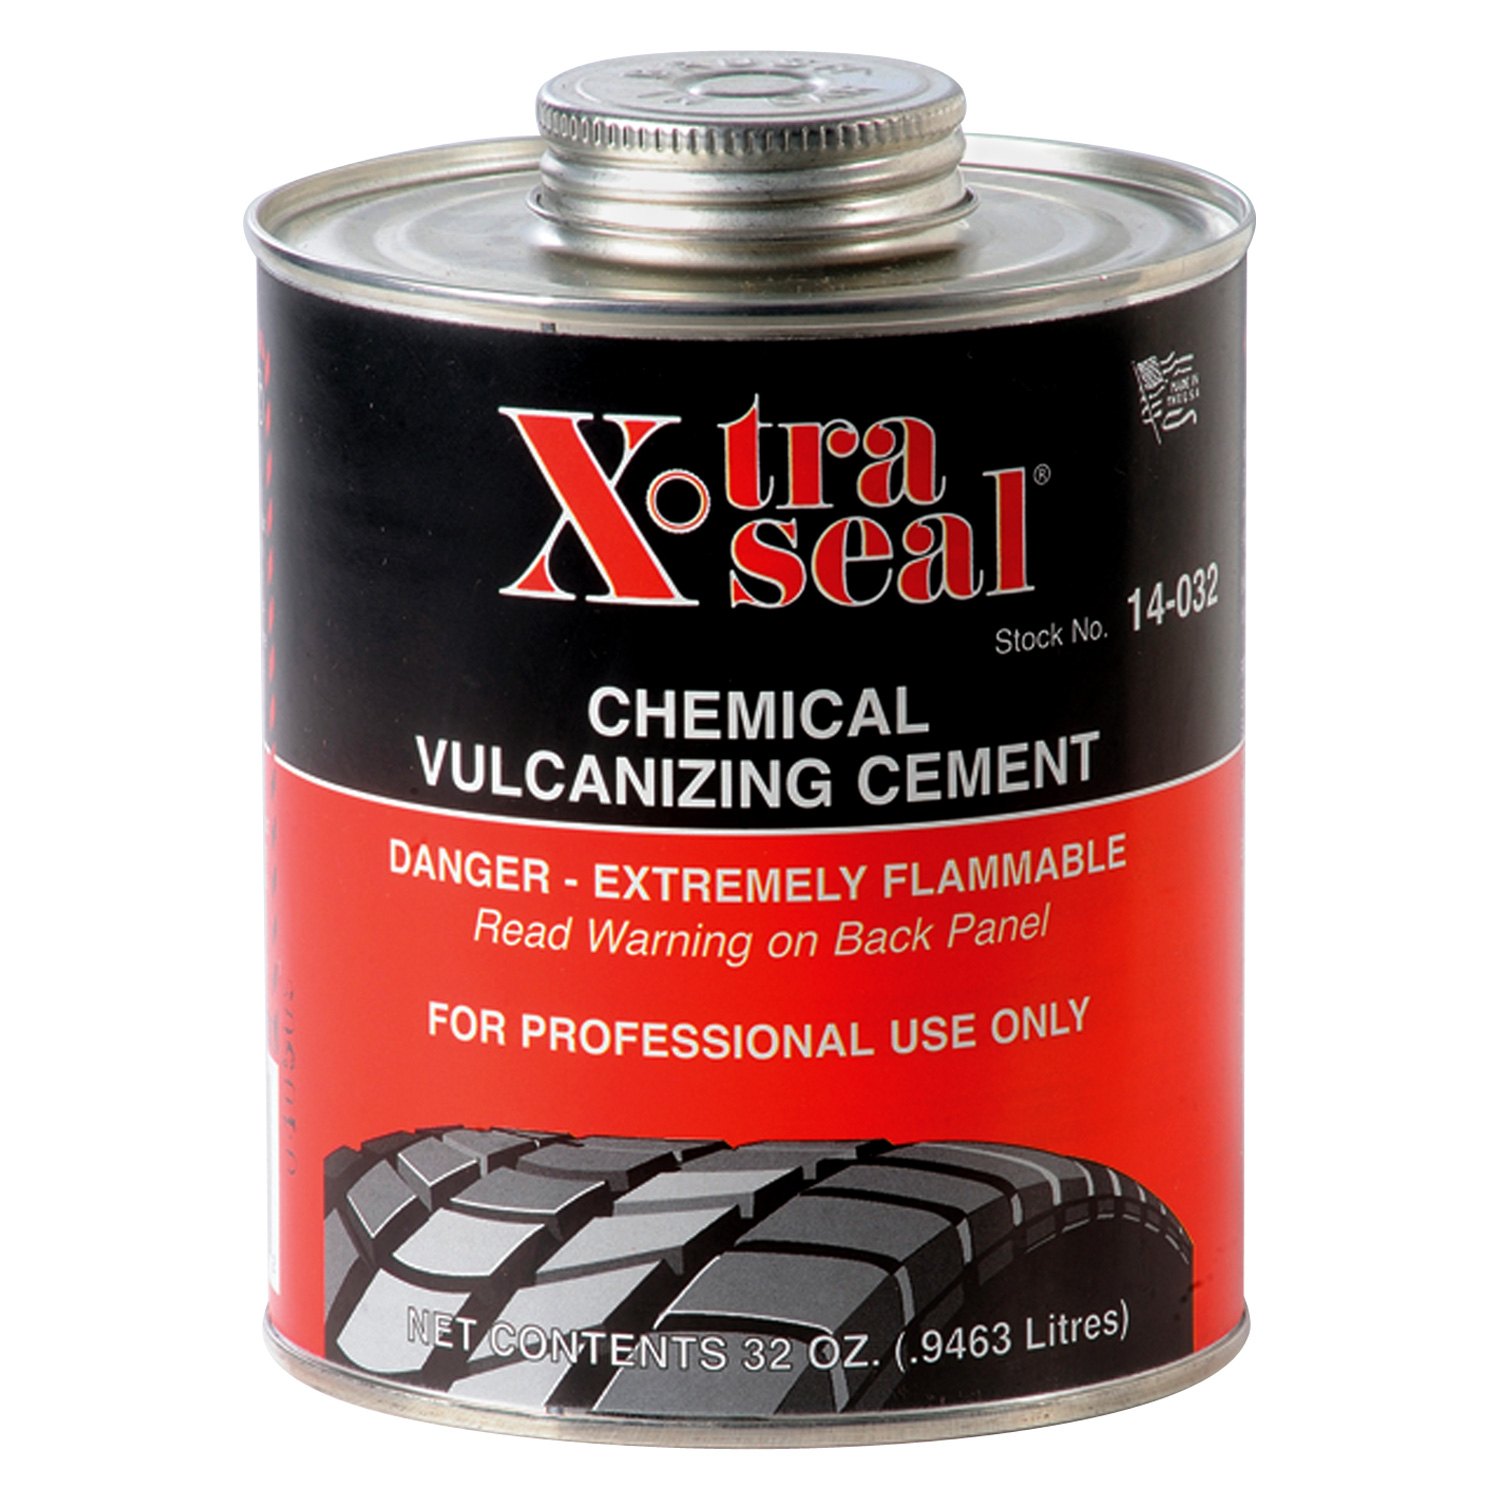 31 Incorporated® 14-032 - 32 oz. Chemical Flammable Vulcanizing Cement